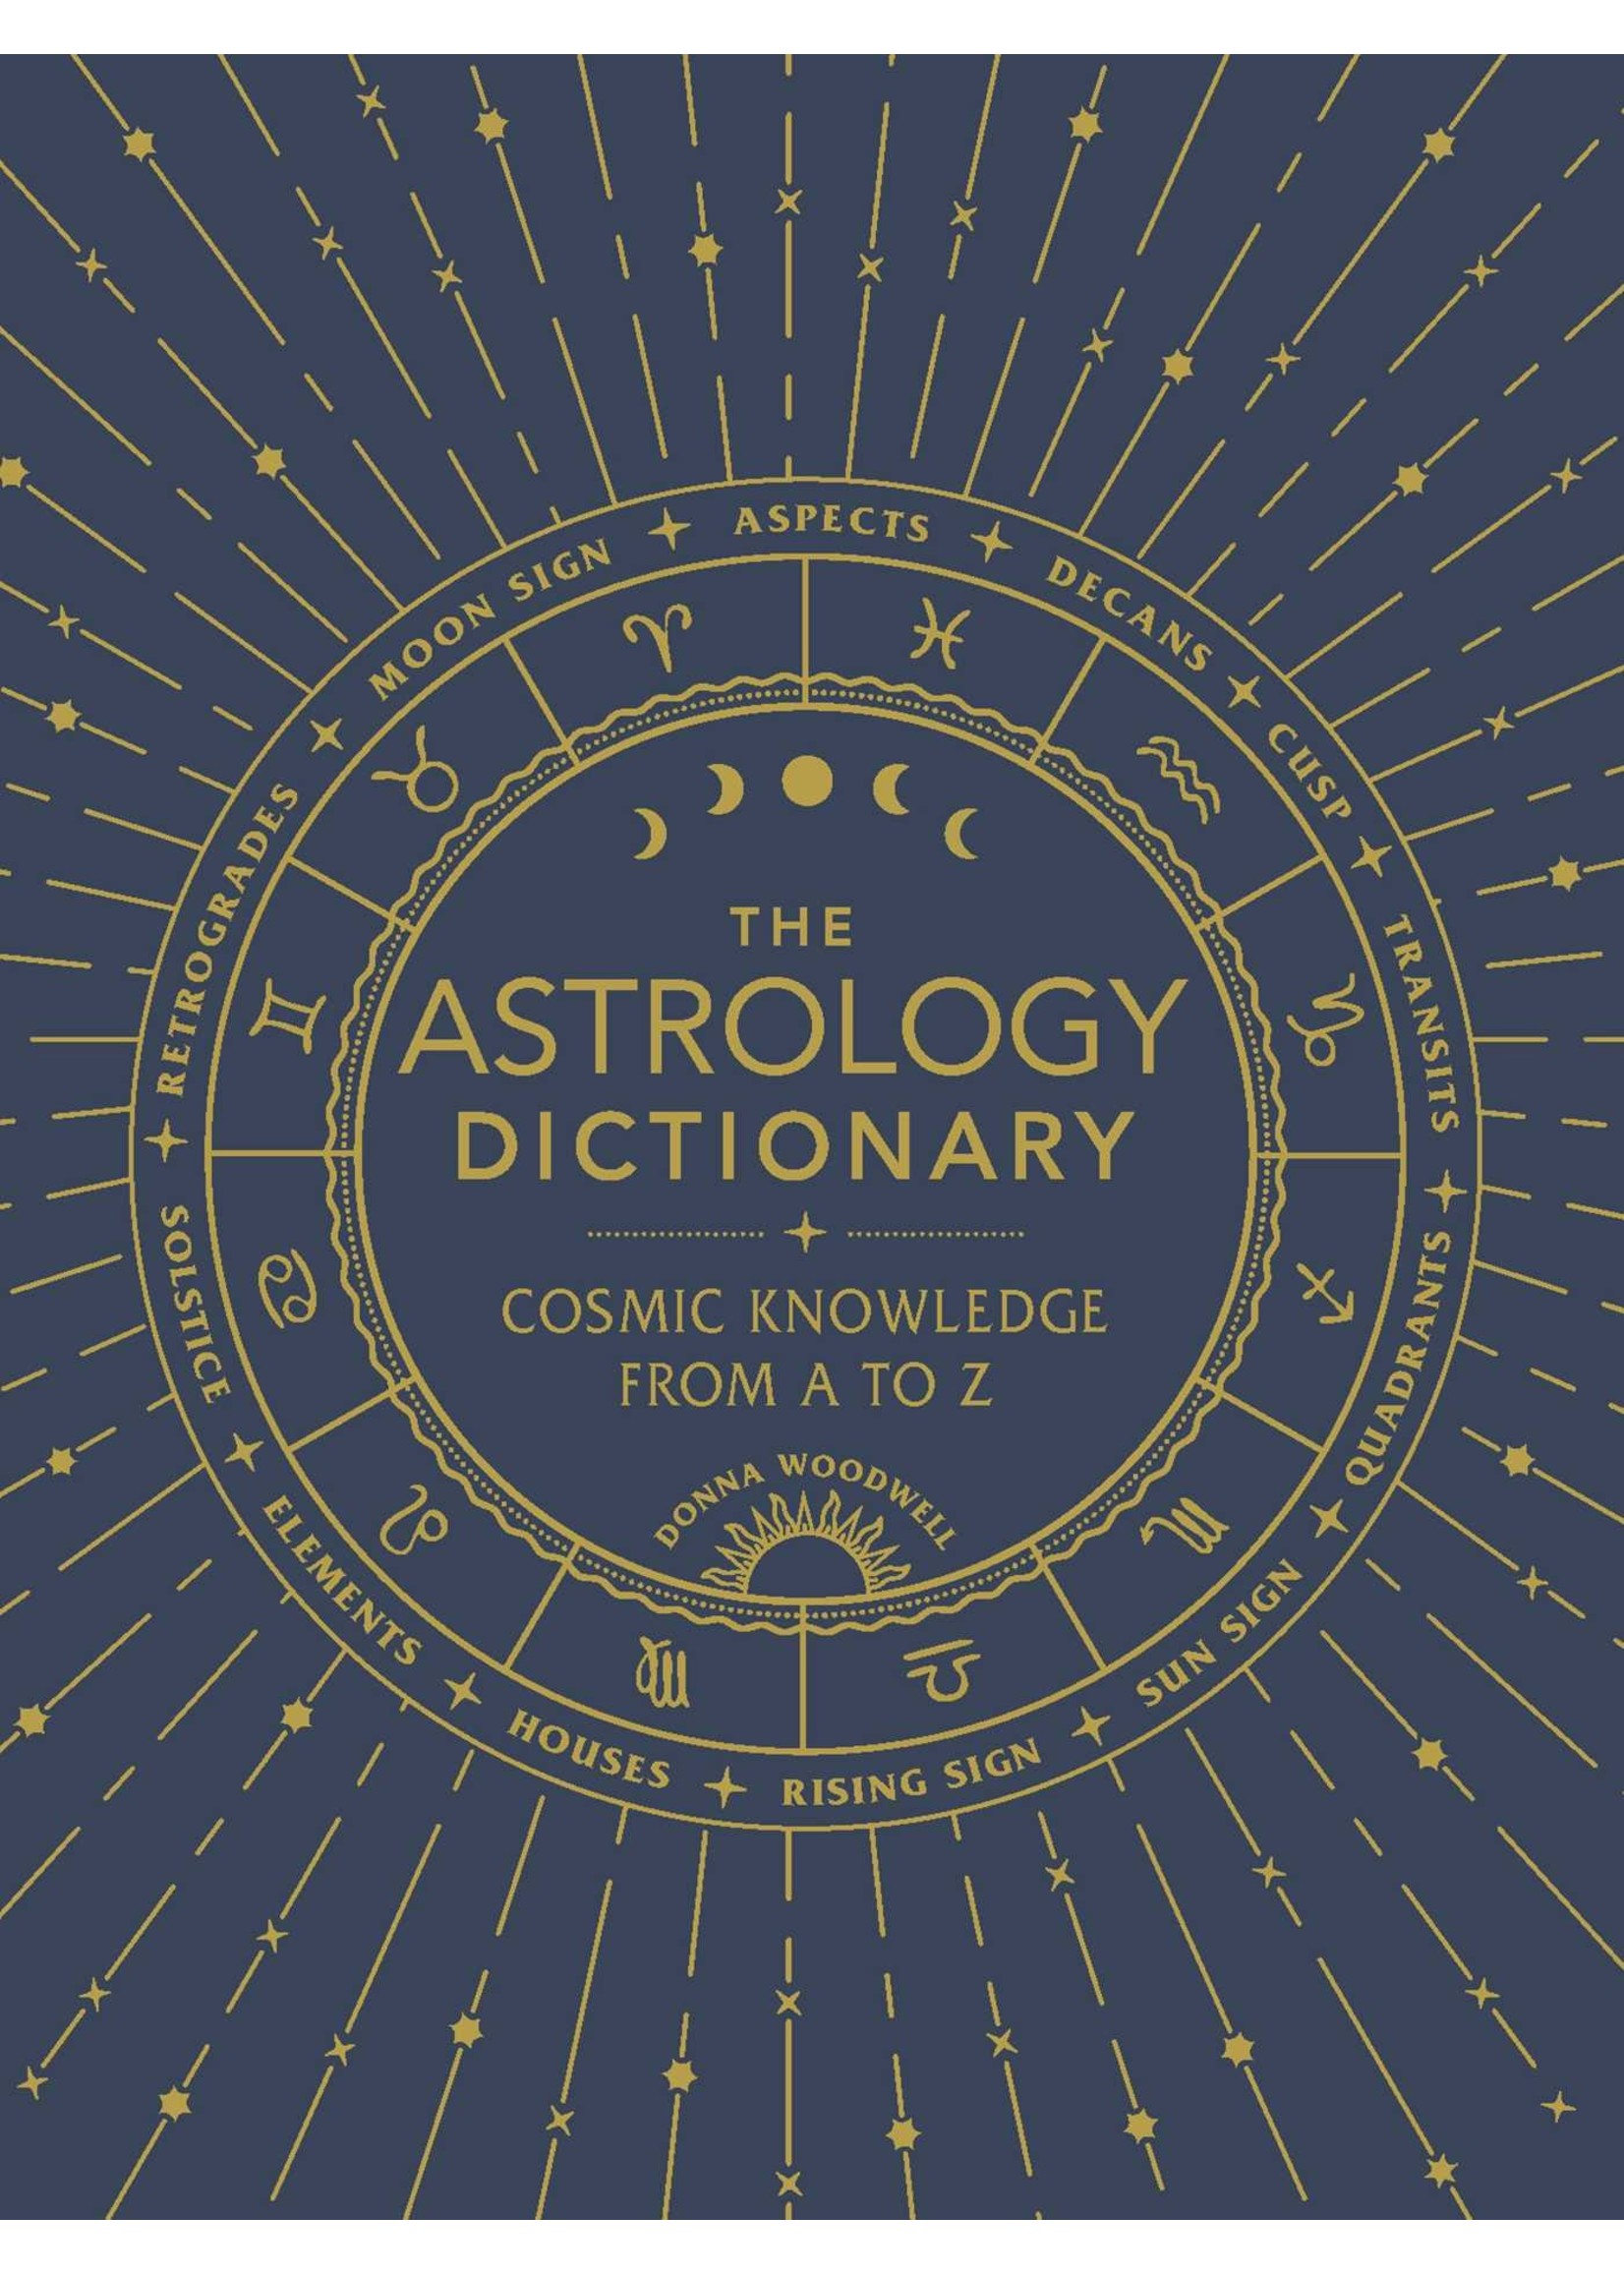 The Astrology Dictionary: Cosmic Knowledge from A to Z by Donna Woodwell